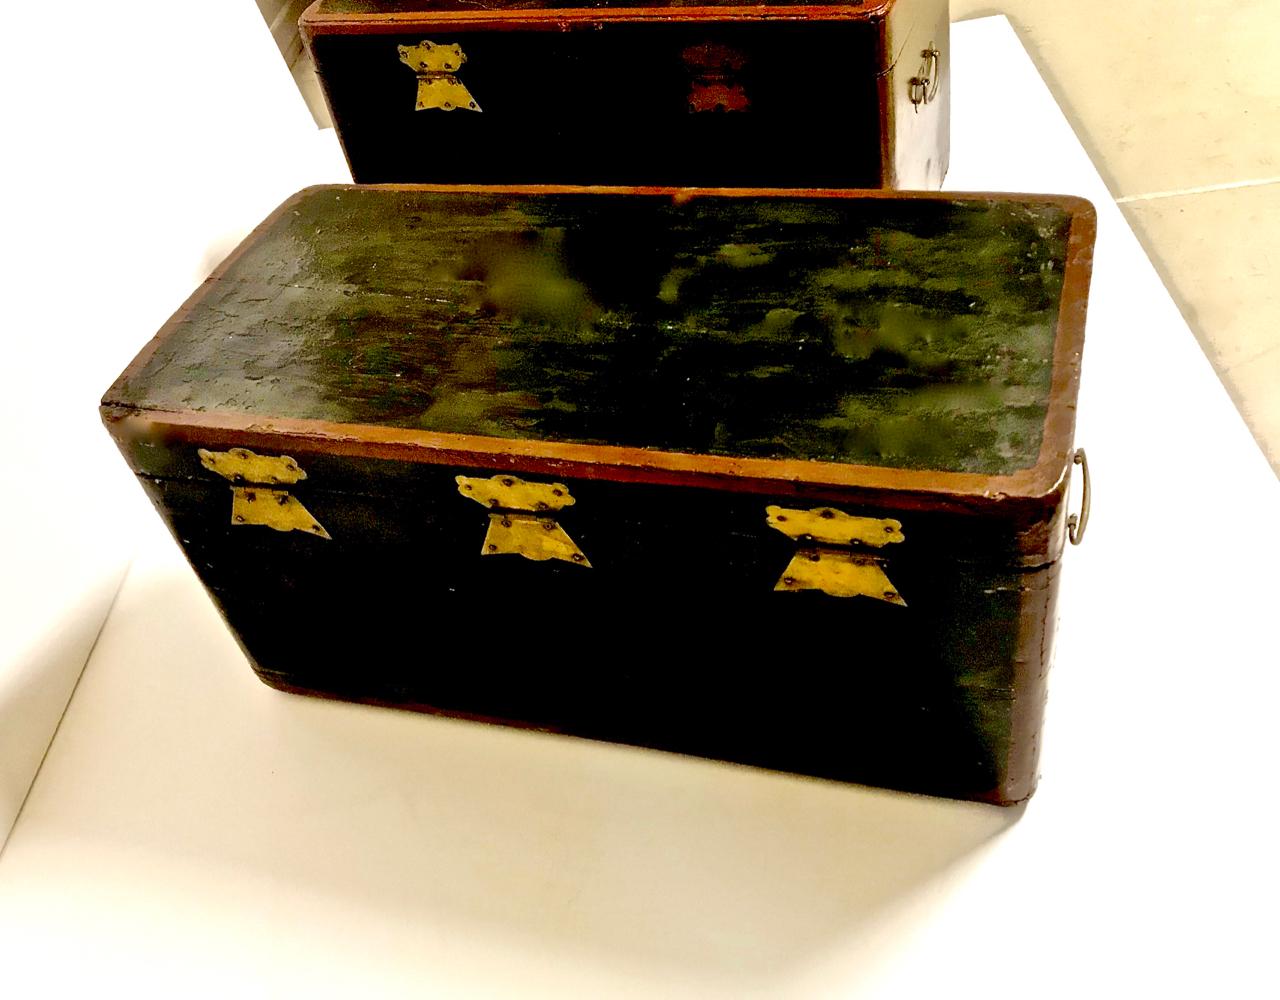 Brass Pair of Small Asian Lacquer Boxes or Trunks, Late 19th Century